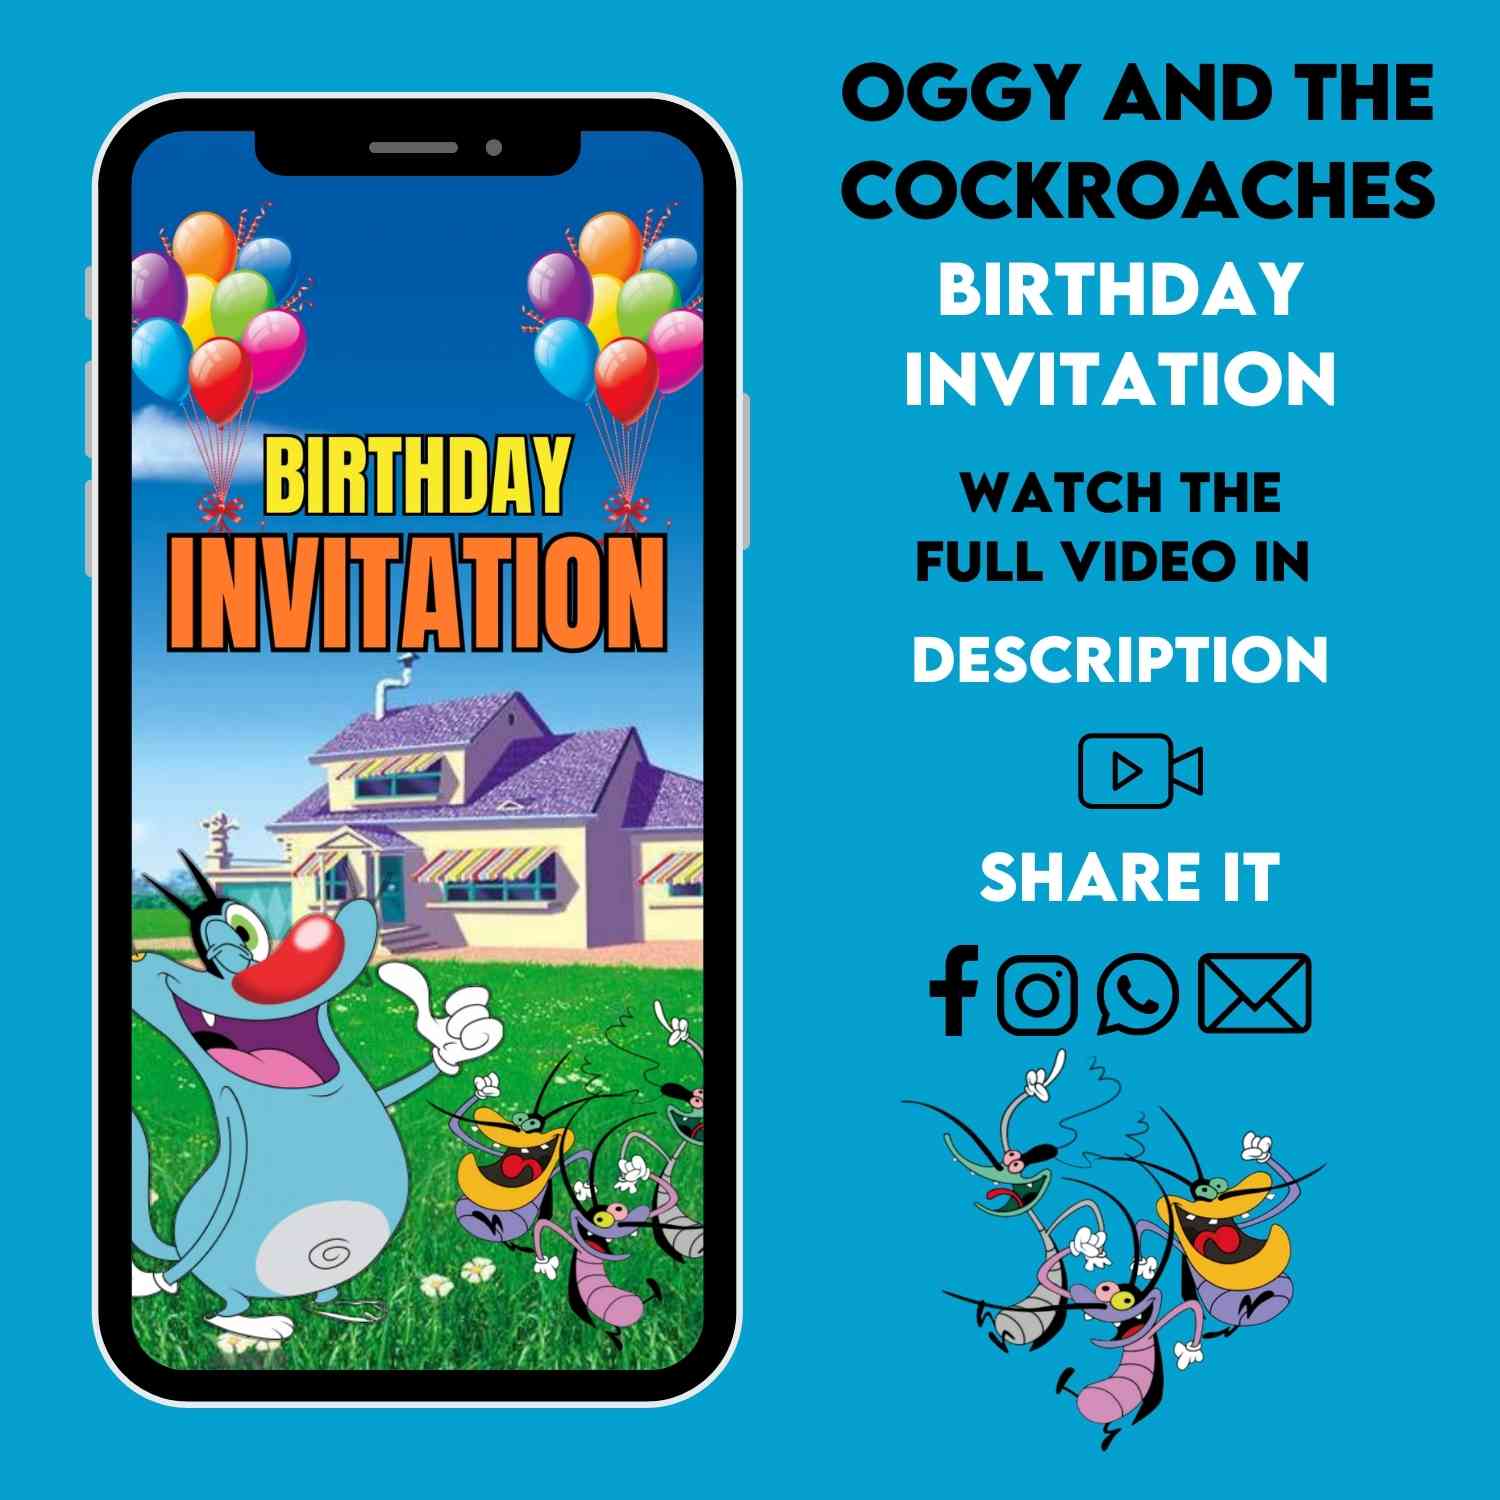 oggy and the cockroaches Birthday Video Invitation | oggy and the cockroaches Animated Theme Invitation